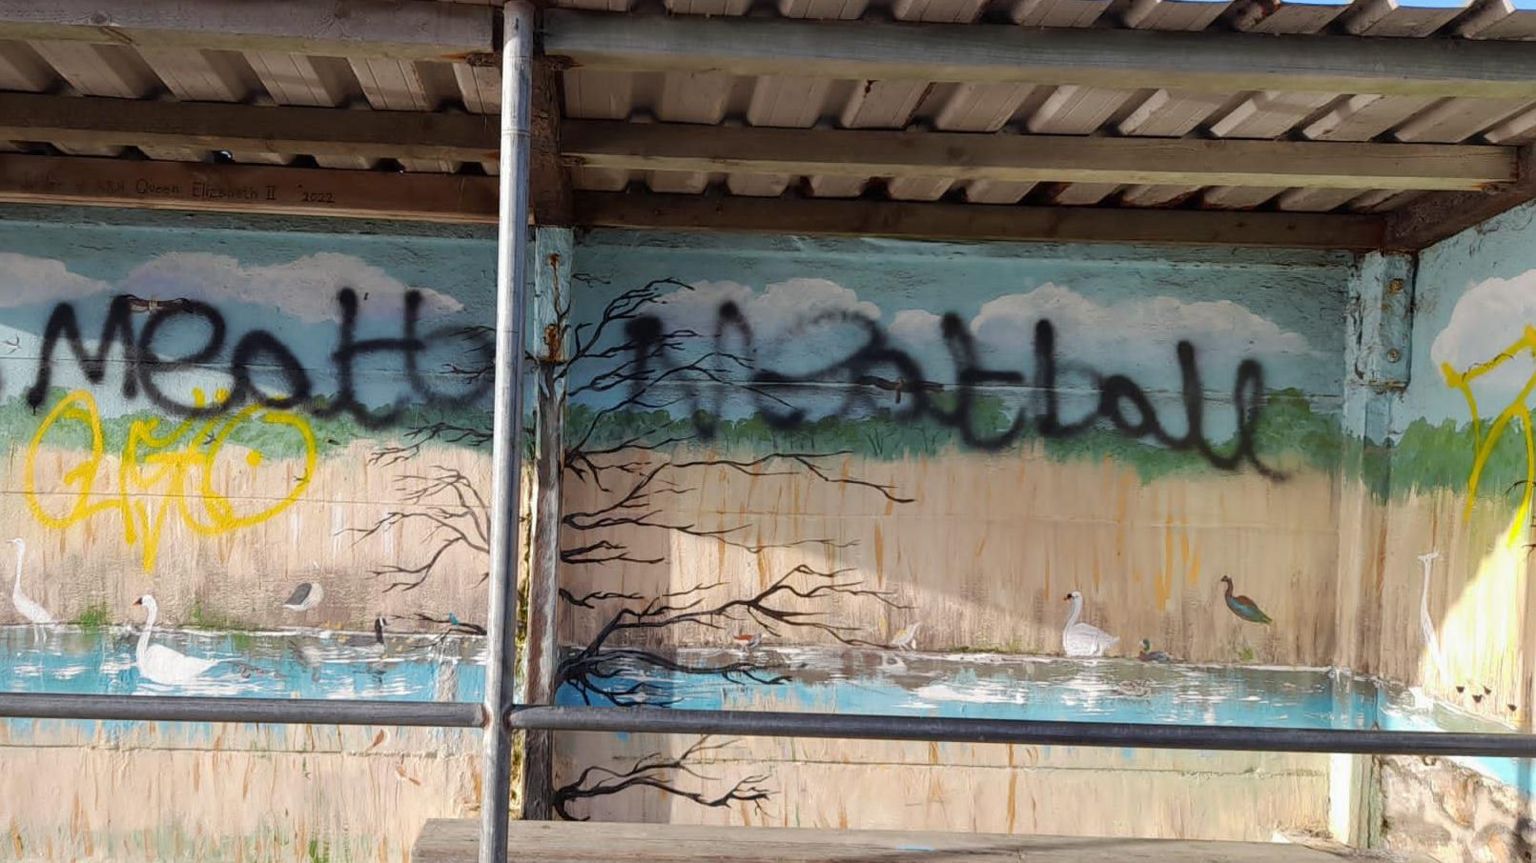 Graffitied bus stop